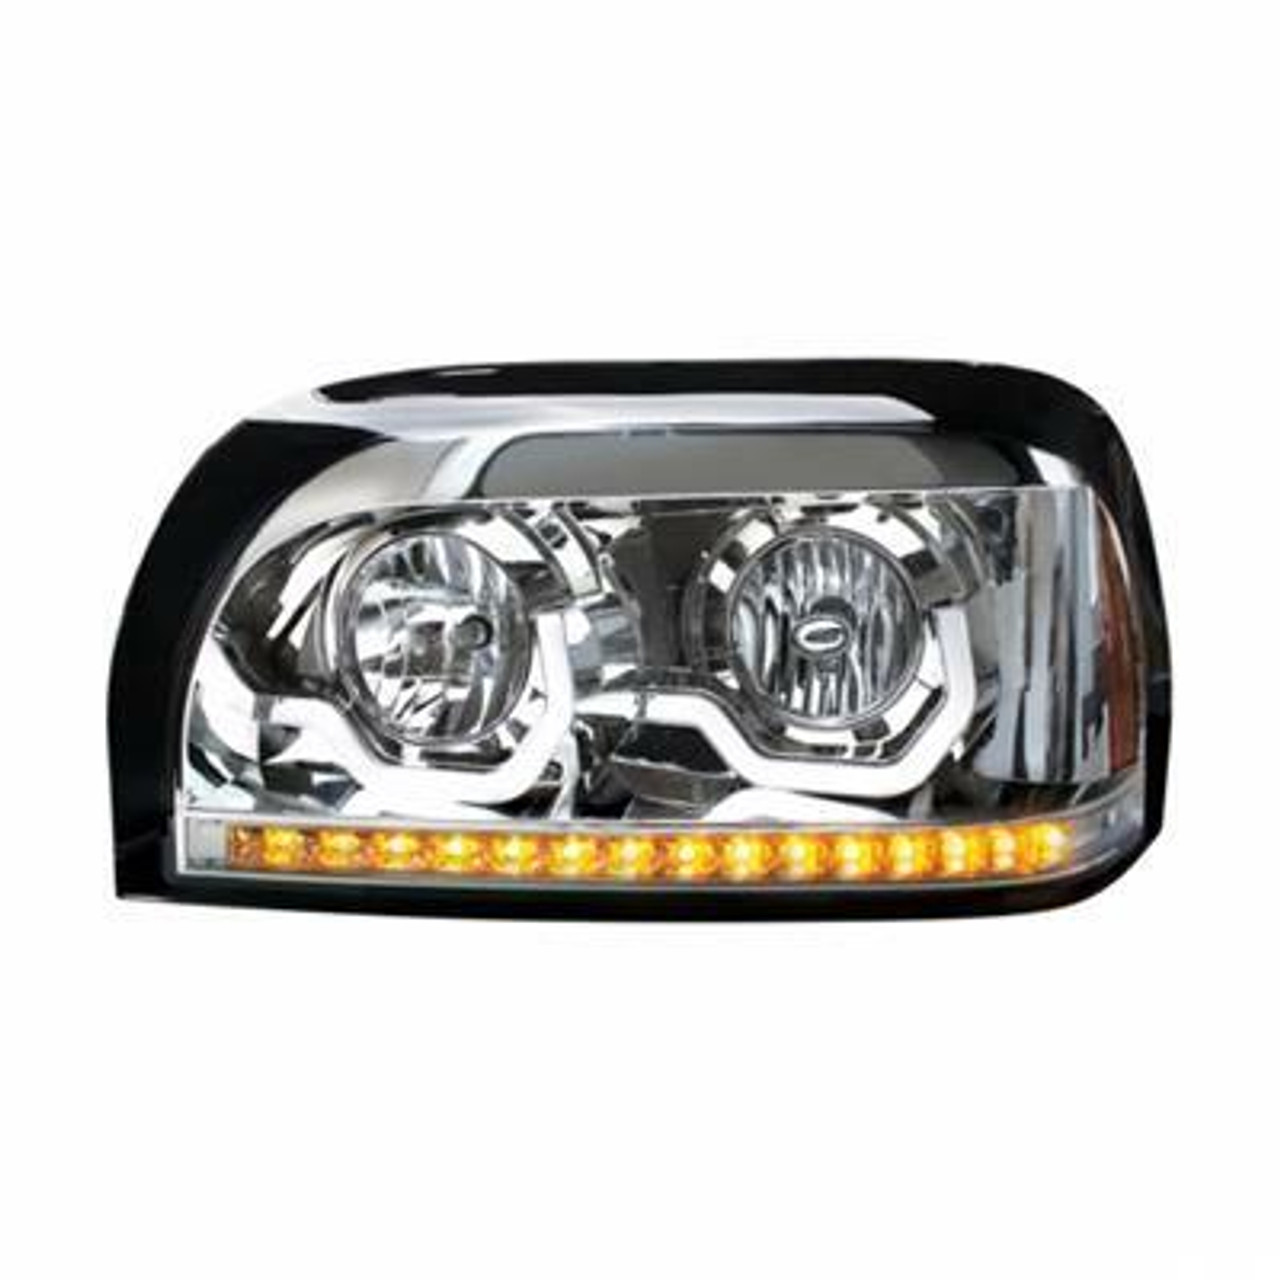 Chrome Projection Headlight With LED Turn Signal & Light Bar For Freightliner Century - Passenger